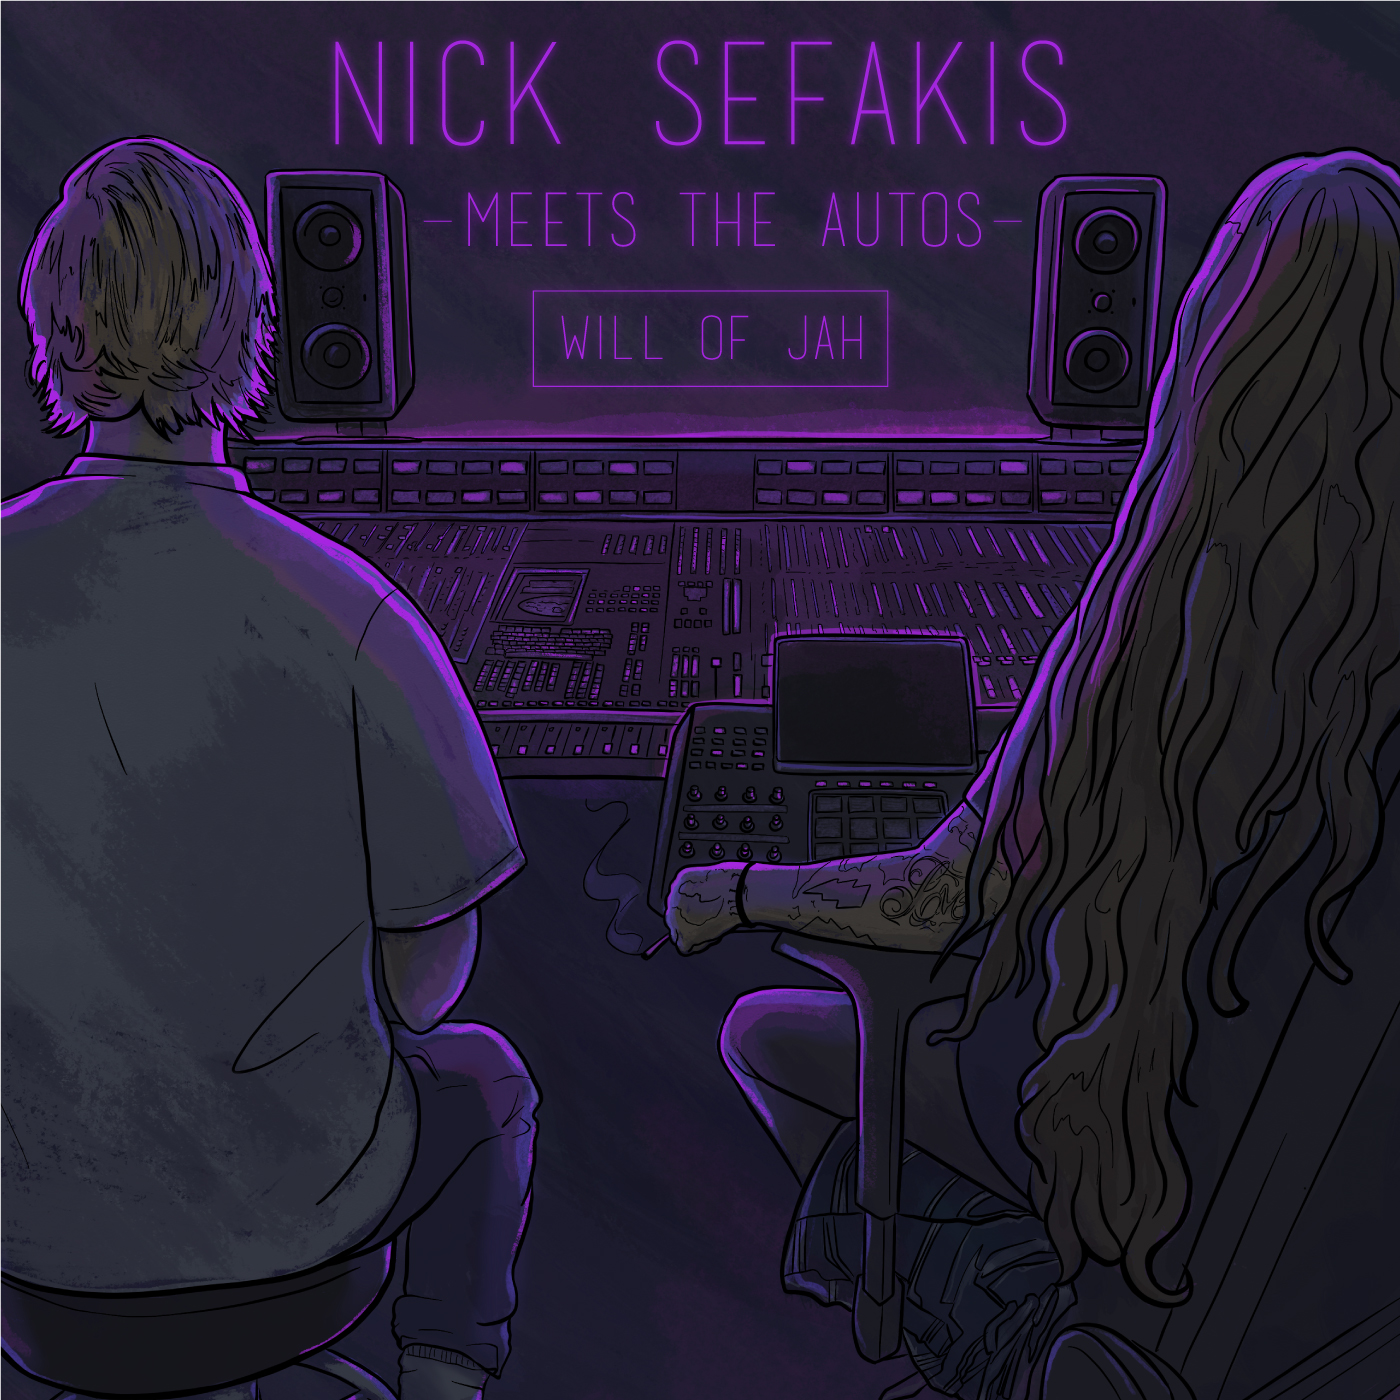 THE AUTOS TEAM UP WITH NICK SEFAKIS ON "WILL OF JAH"